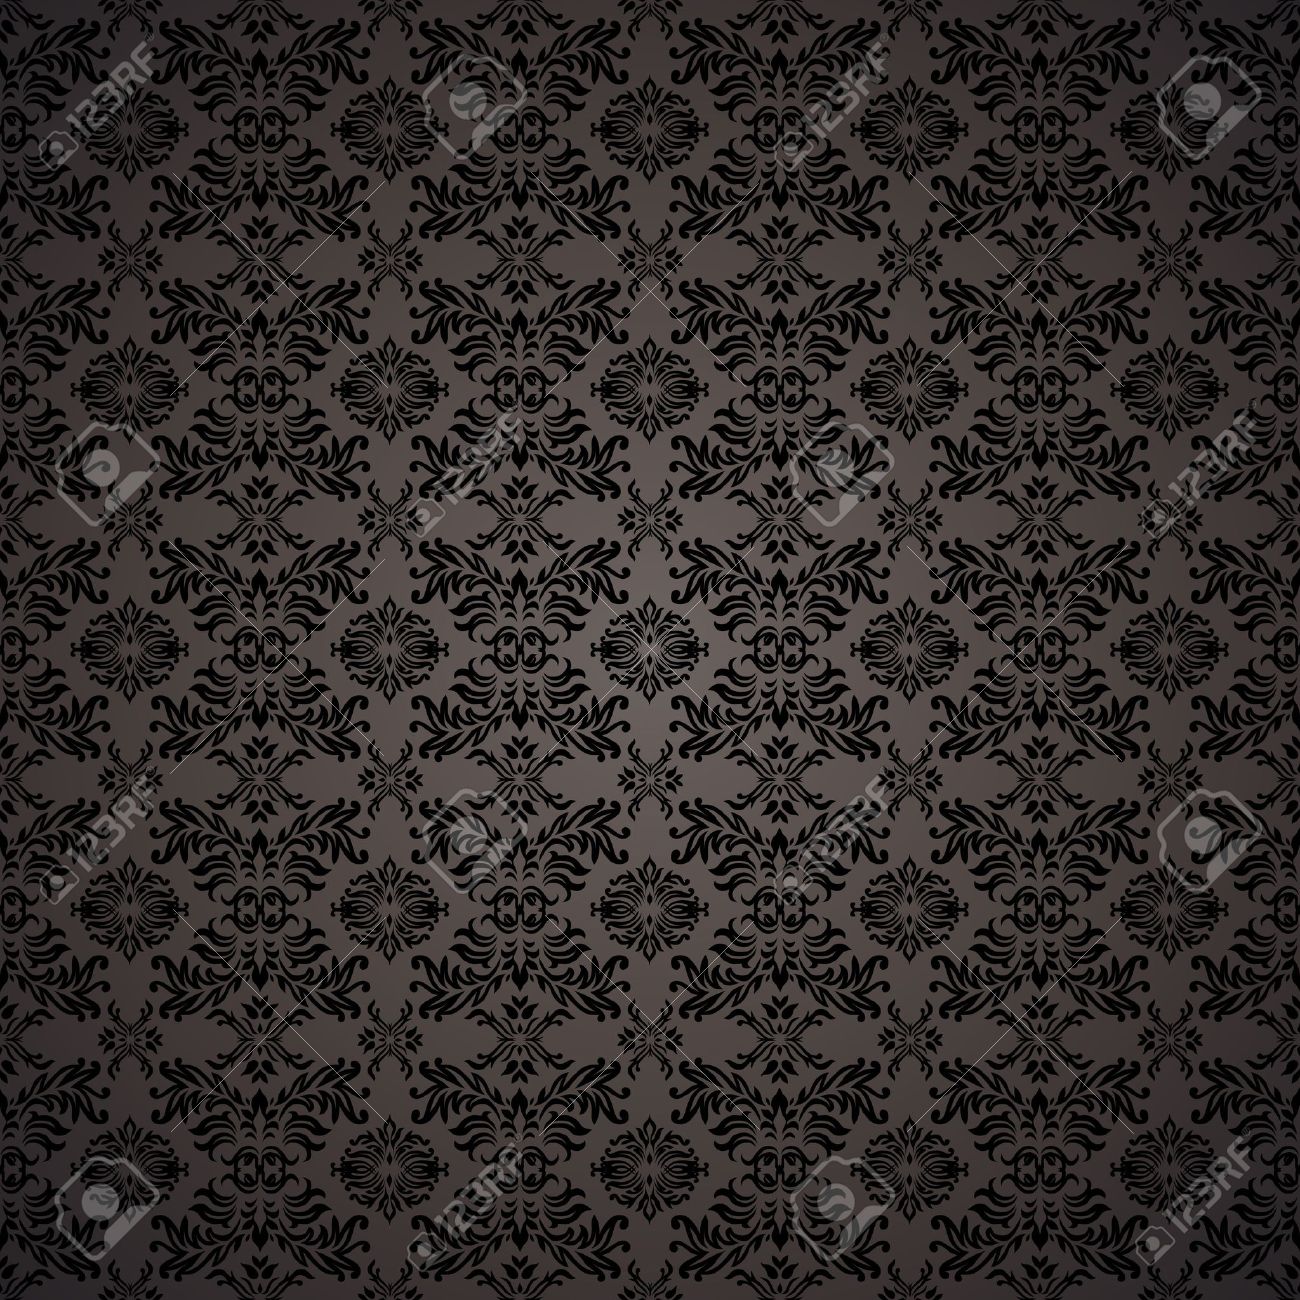 Black Gothic Repeating Seamless Wallpaper Background Design